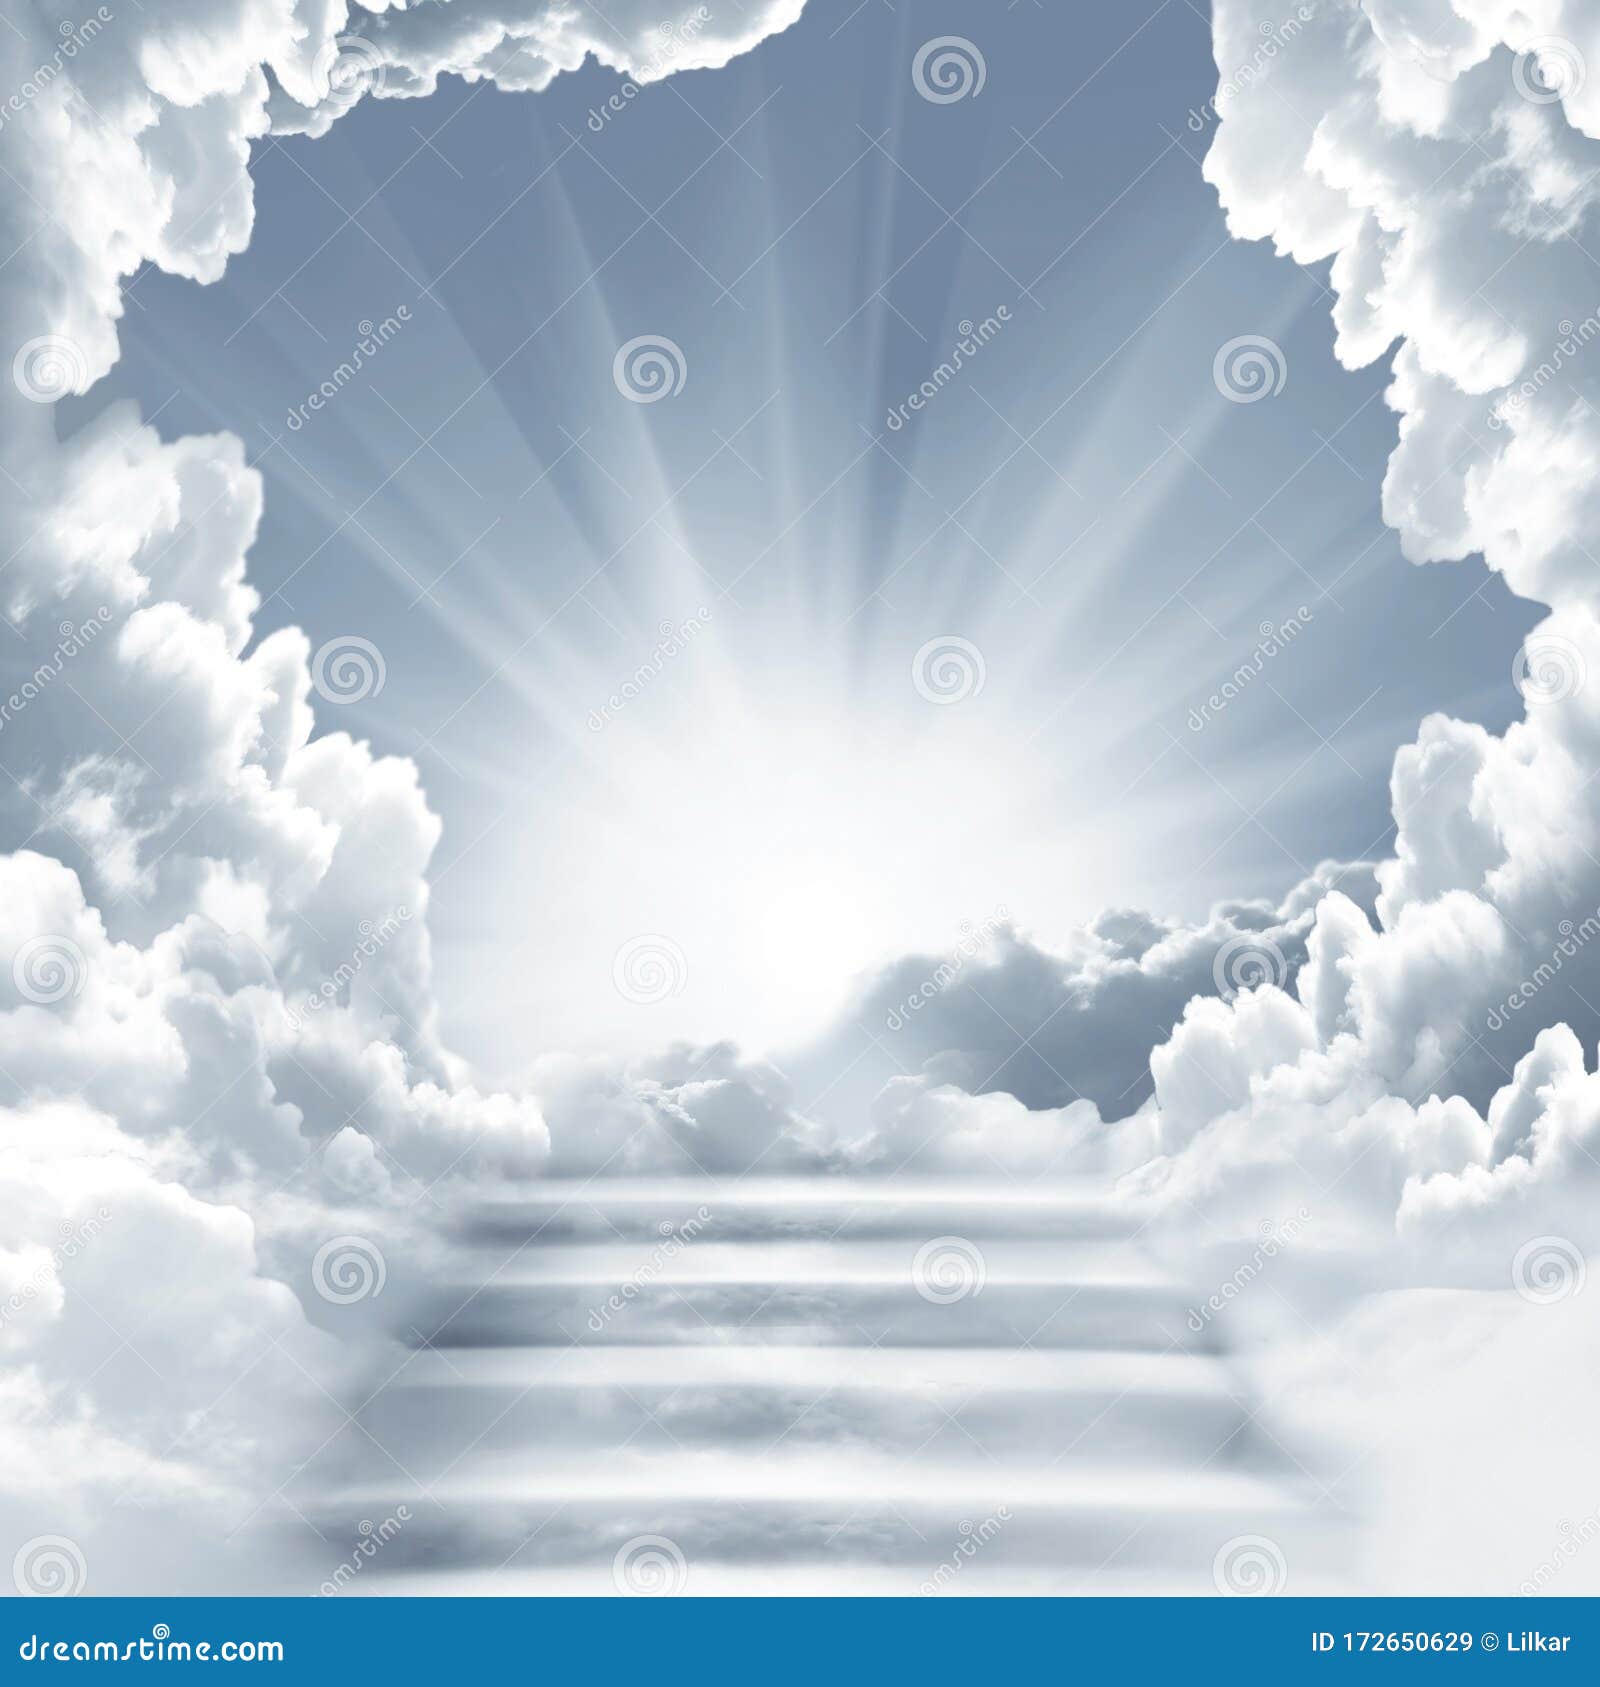 Stairway To  in Sky. Concept with Sun and White Clouds.  Religion Background Stock Image - Image of light, limit: 172650629